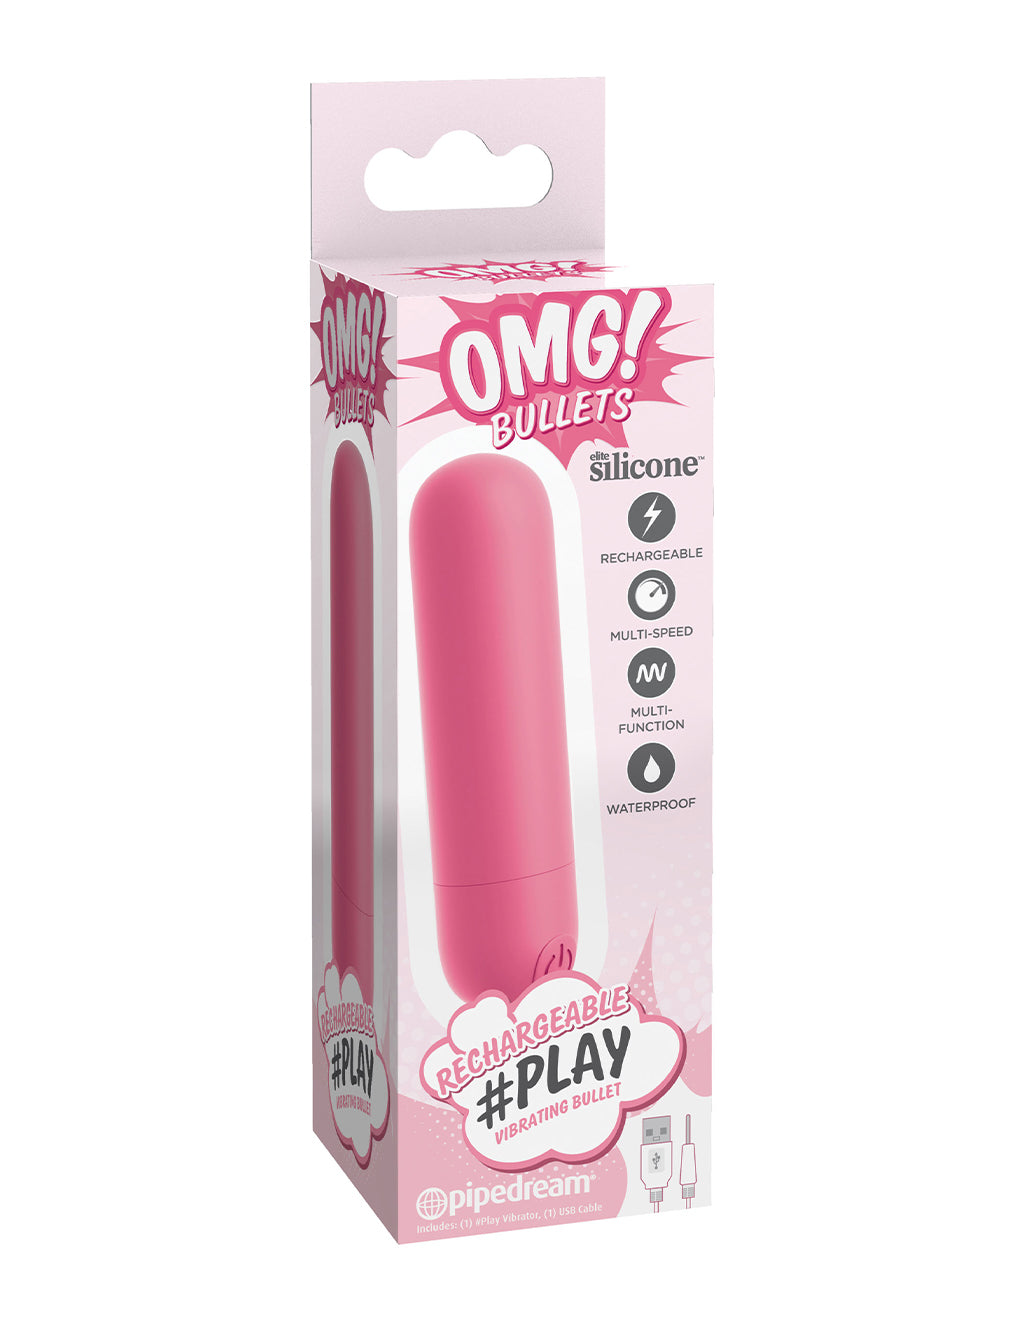 OMG! Bullets #Play Rechargeable Bullet- Pink- Package